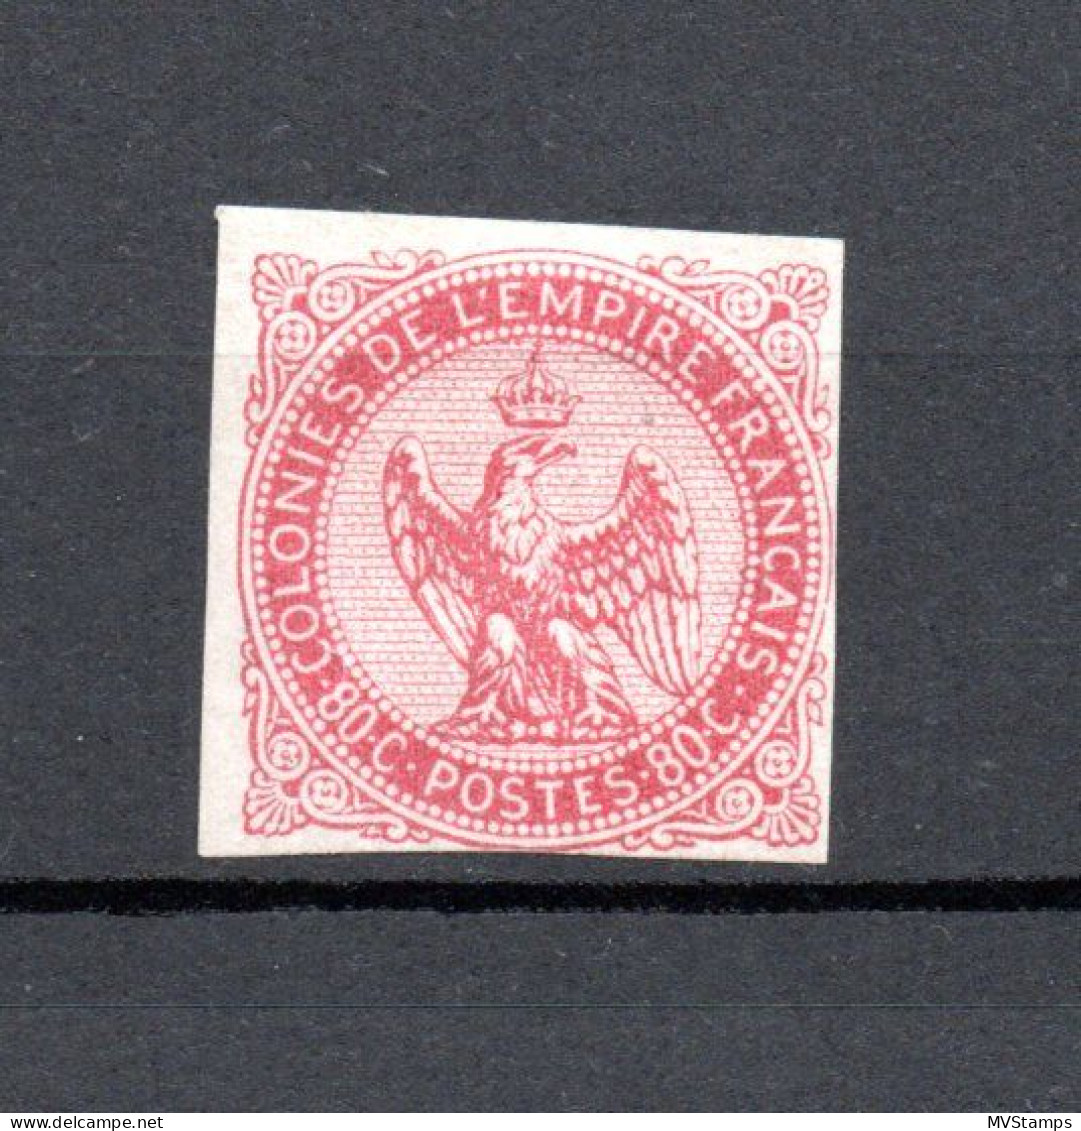 France Colonies 1865 Old Eagle Stamp (Michel 6) Nice Unused/no Gum - Aigle Impérial